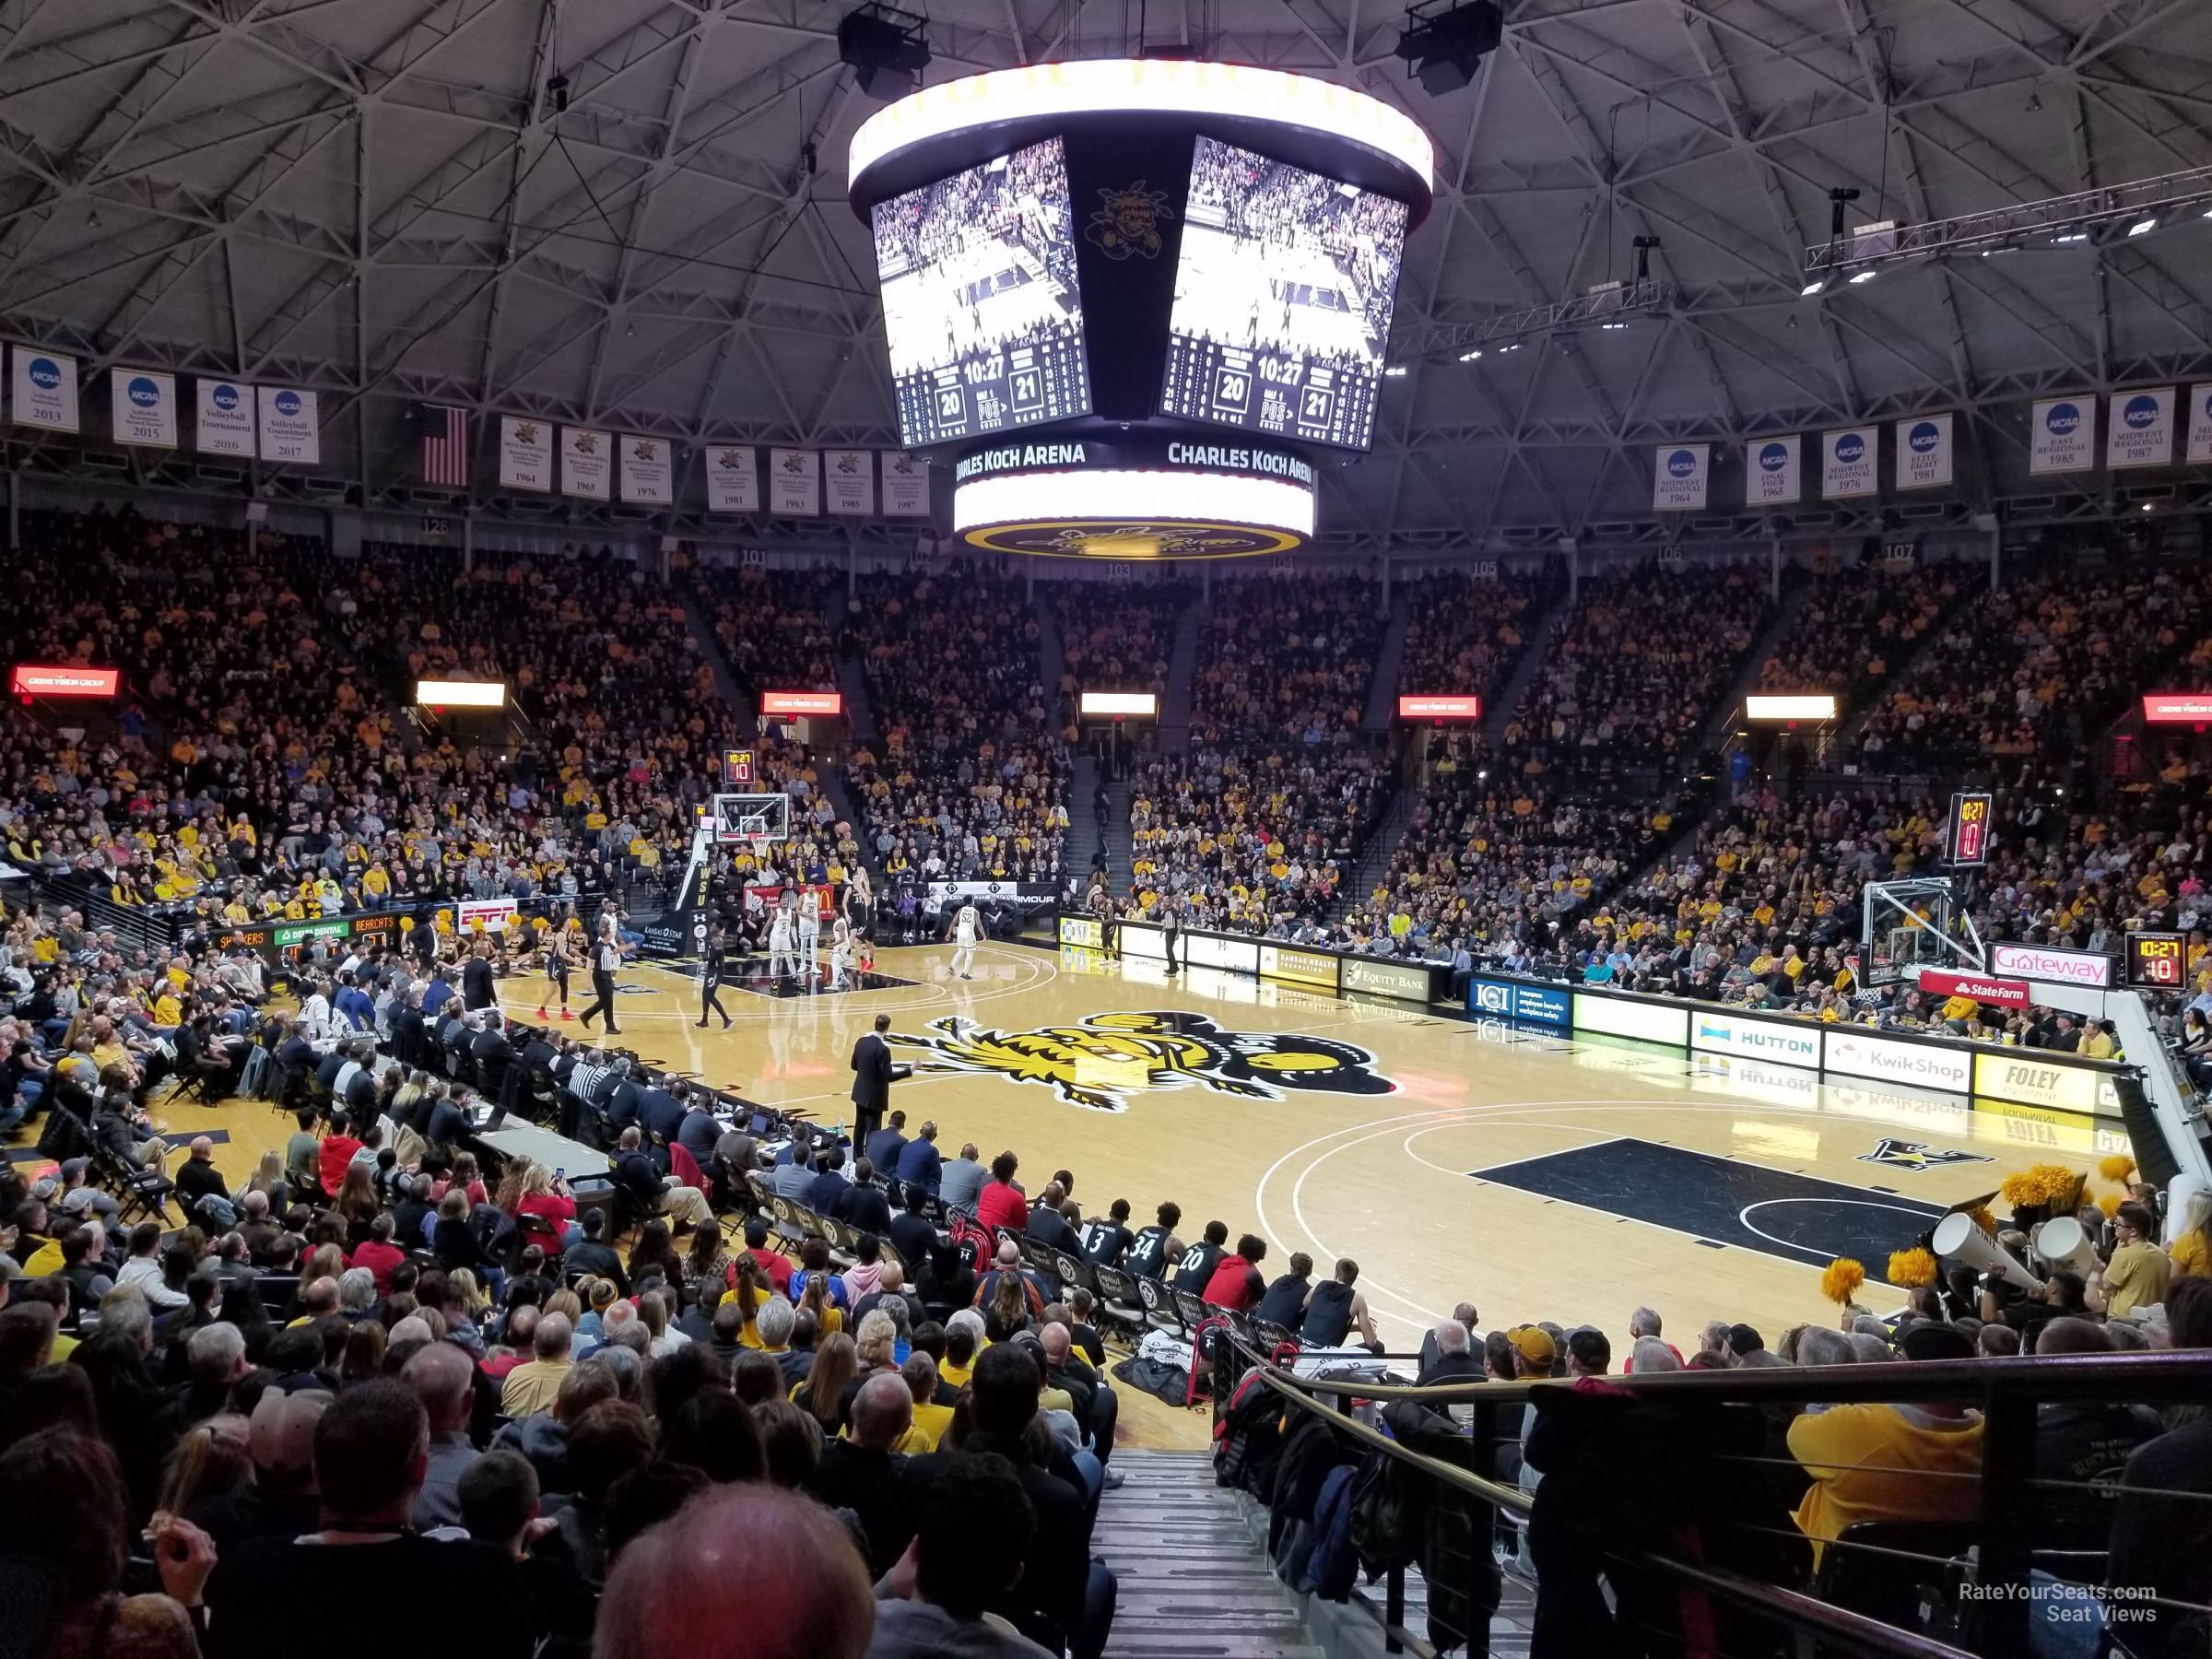 section 118, row 16 seat view  - charles koch arena